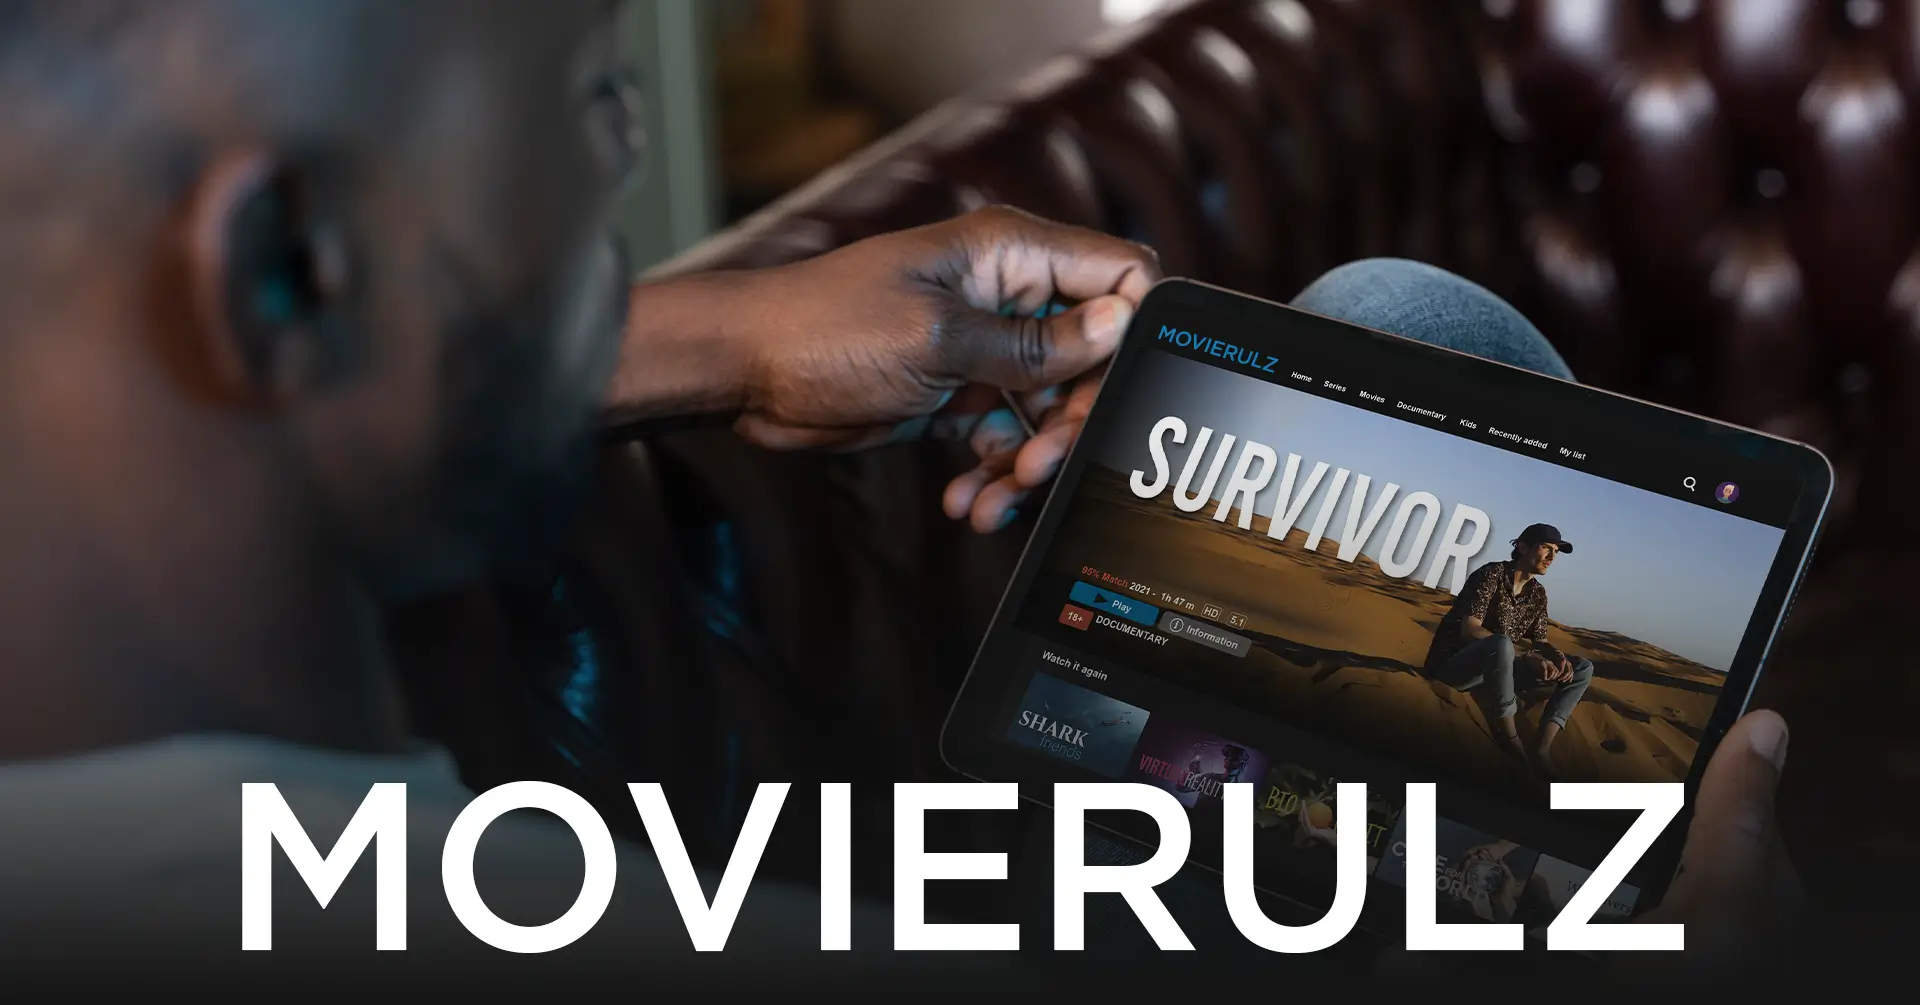 The Movierulz website: Complete Guide to download free Hollywood and Bollywood movies - IEMLabs Blog